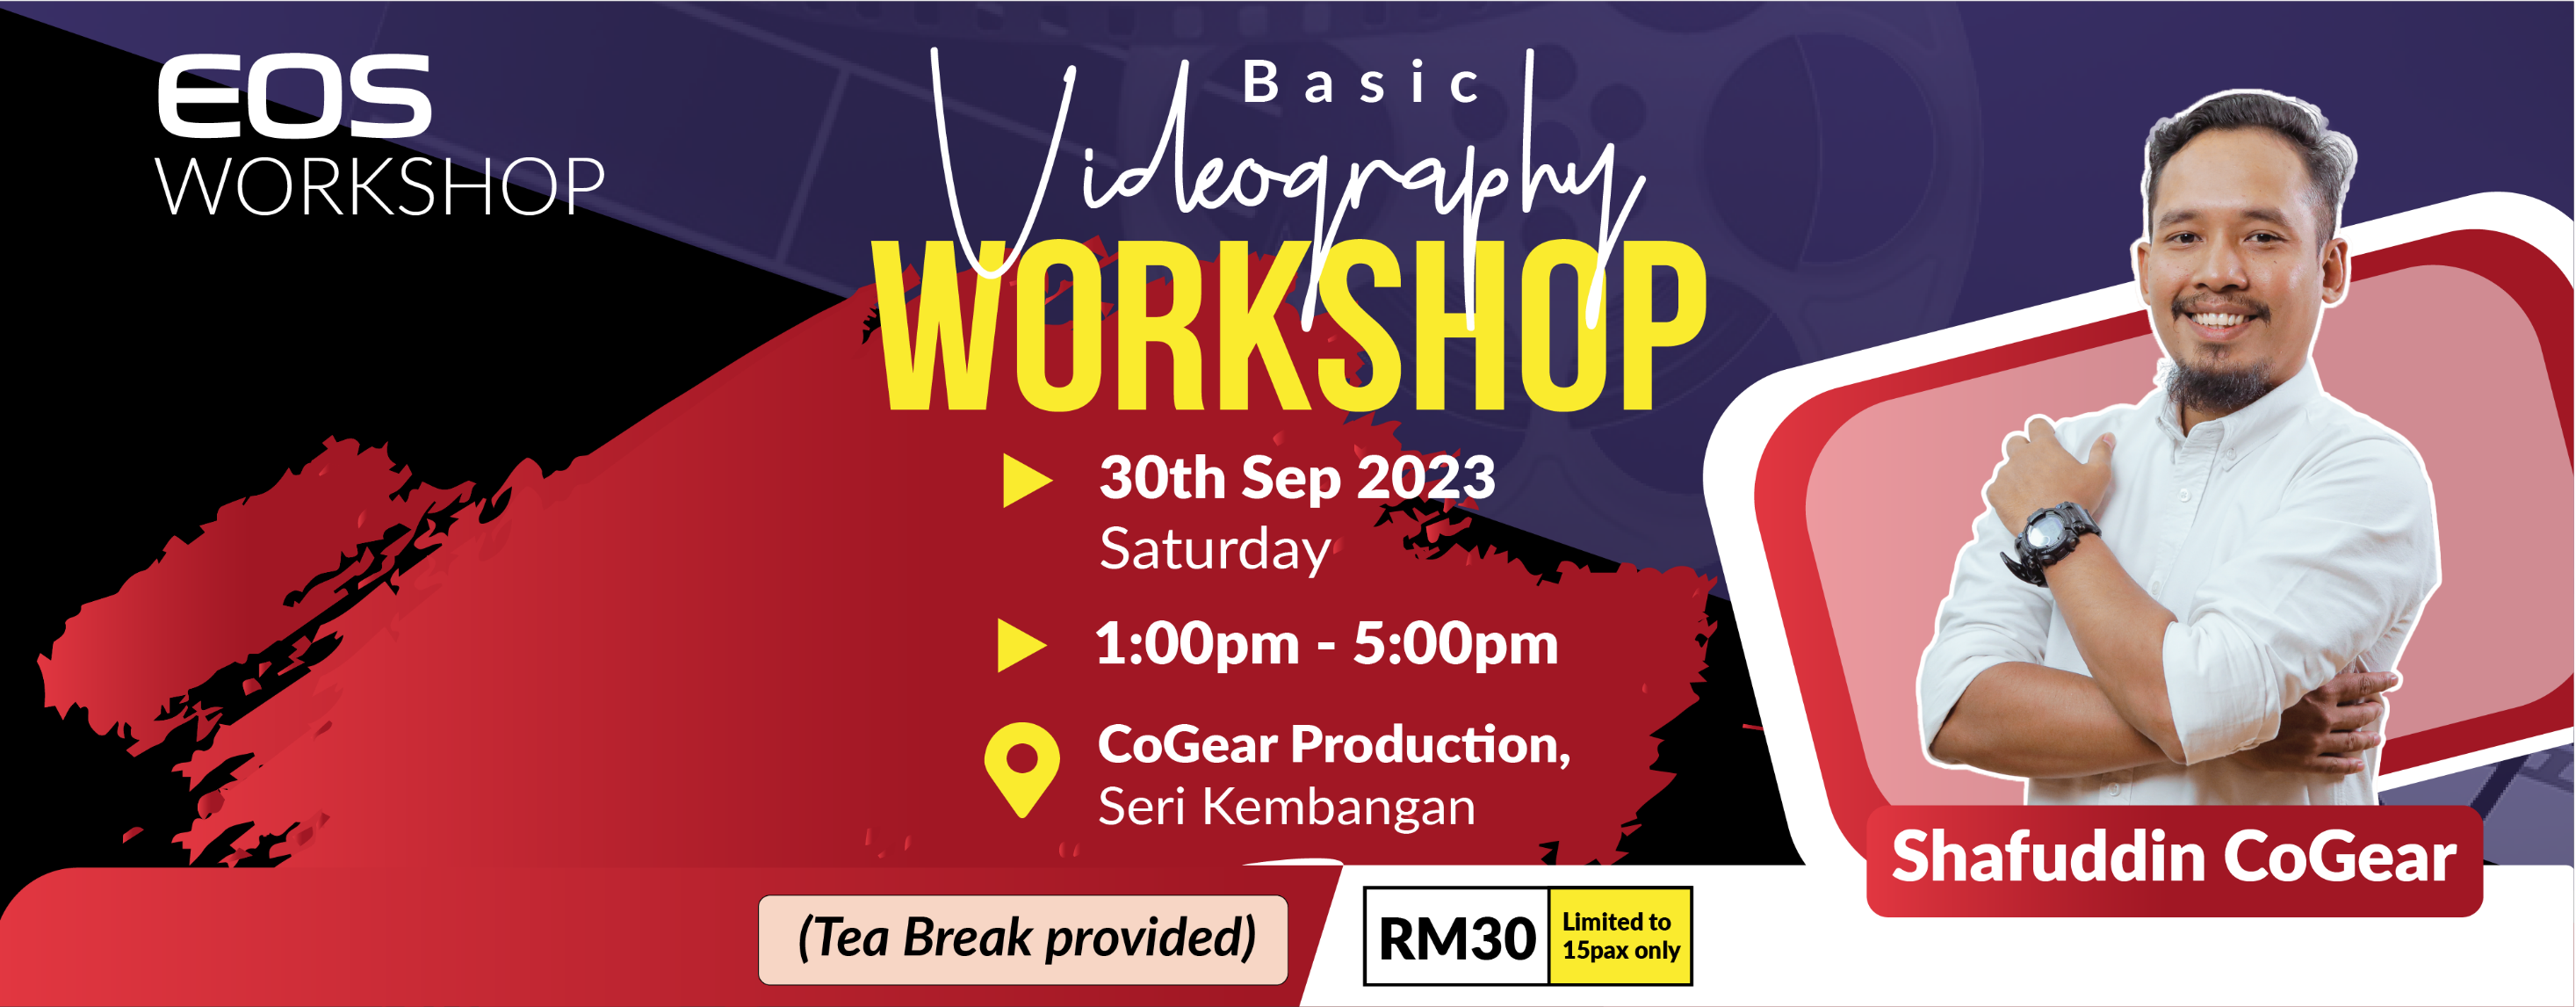 VideoWorkshop_1920x750 in 800 - Shafuddin_lowres.png